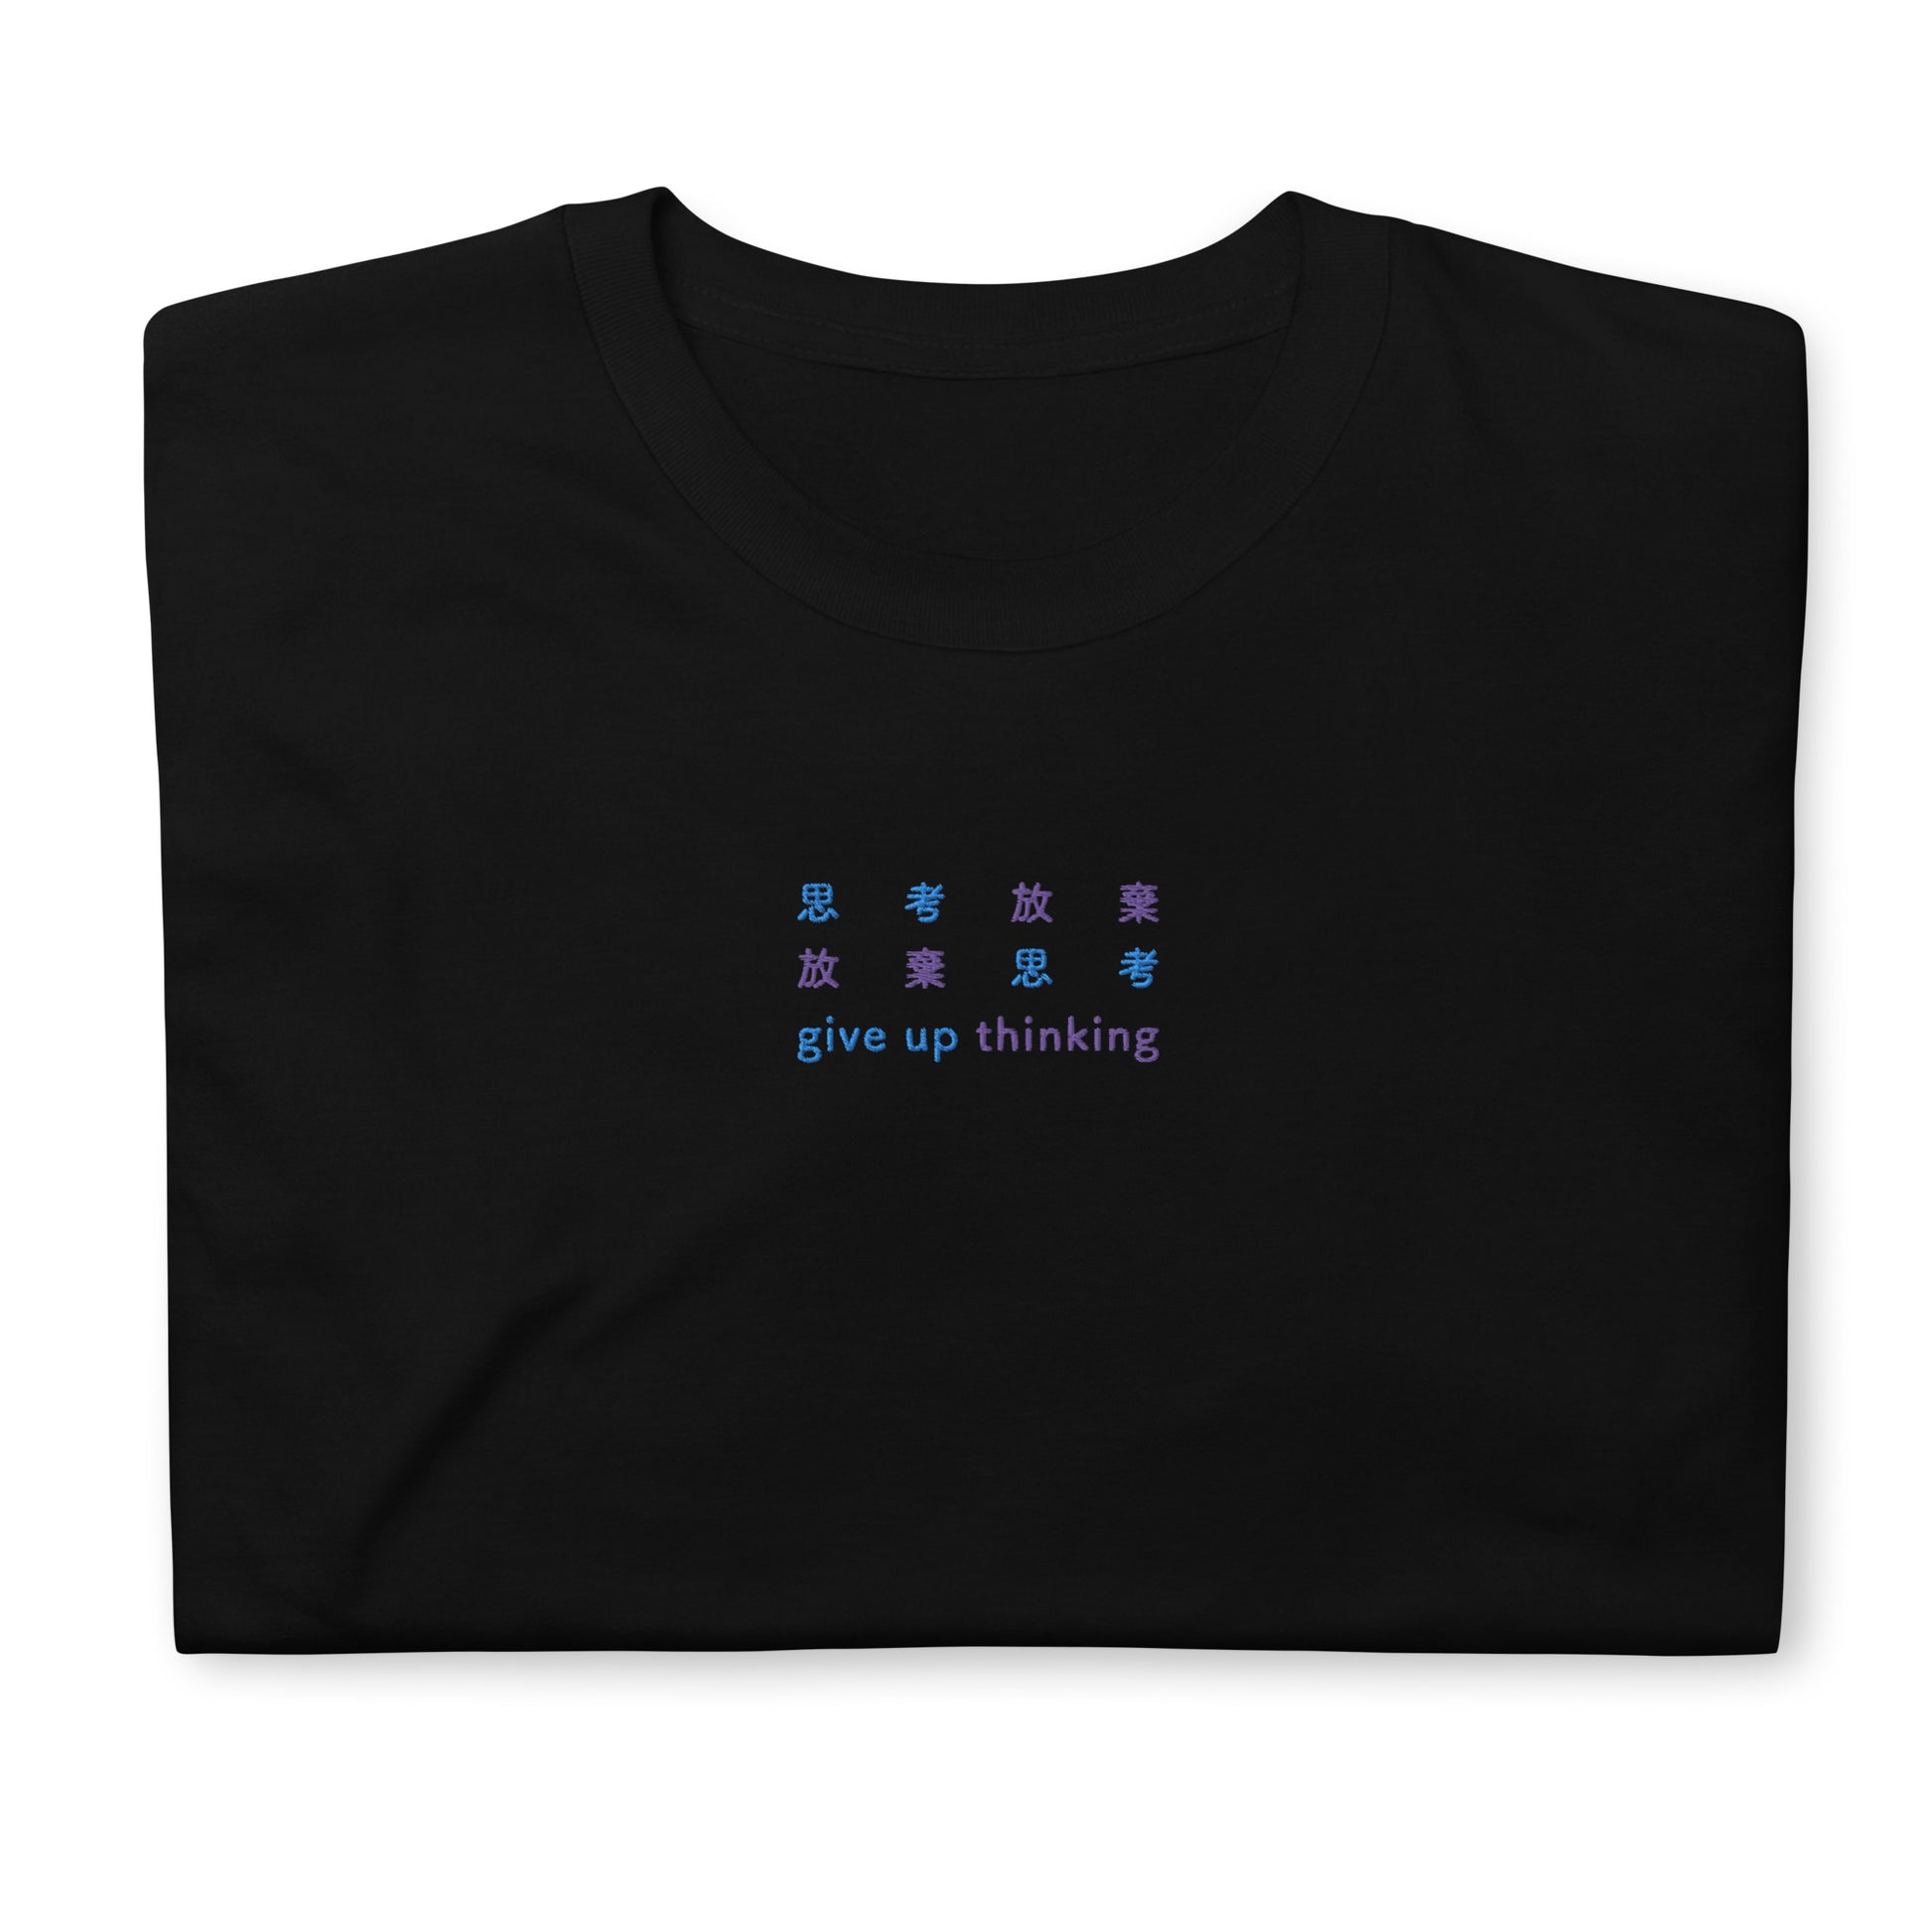 Black High Quality Tee - Front Design with an Light Blue, Purple Embroidery "Give Up Thinking" in Japanese,Chinese and English